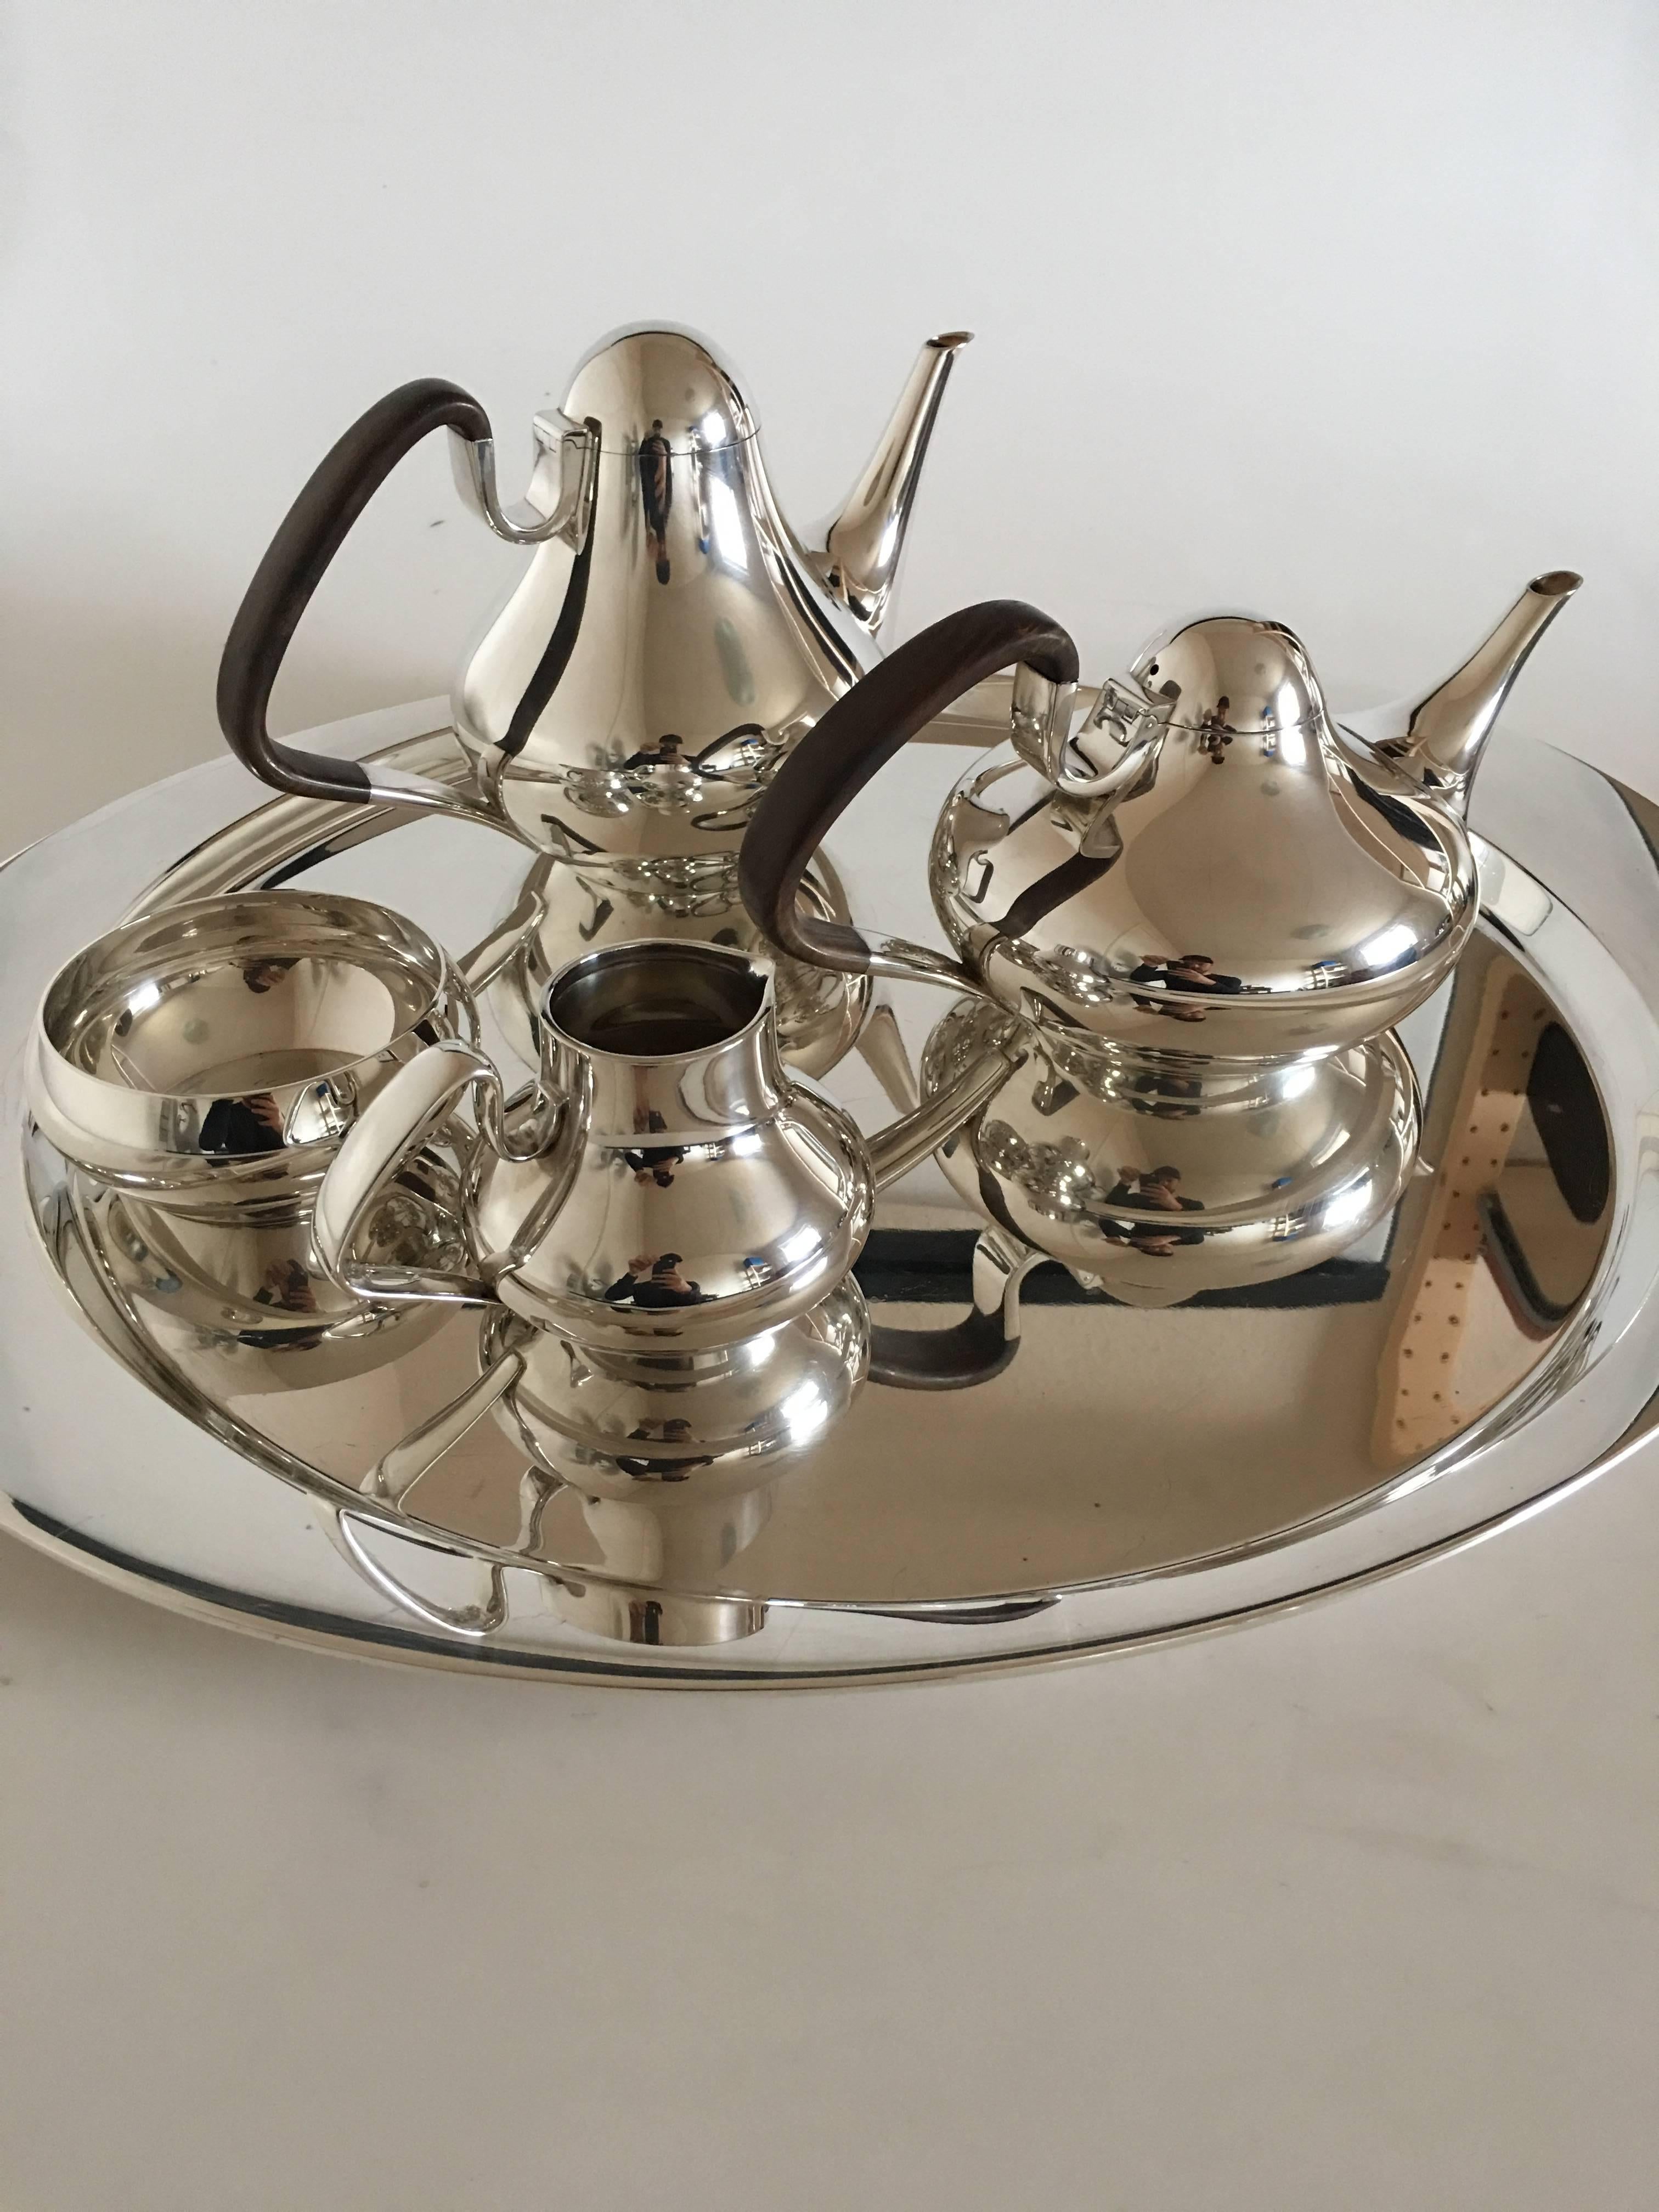 Danish Georg Jensen Sterling Silver Henning Koppel Tea and Coffee Set with Tray #1017